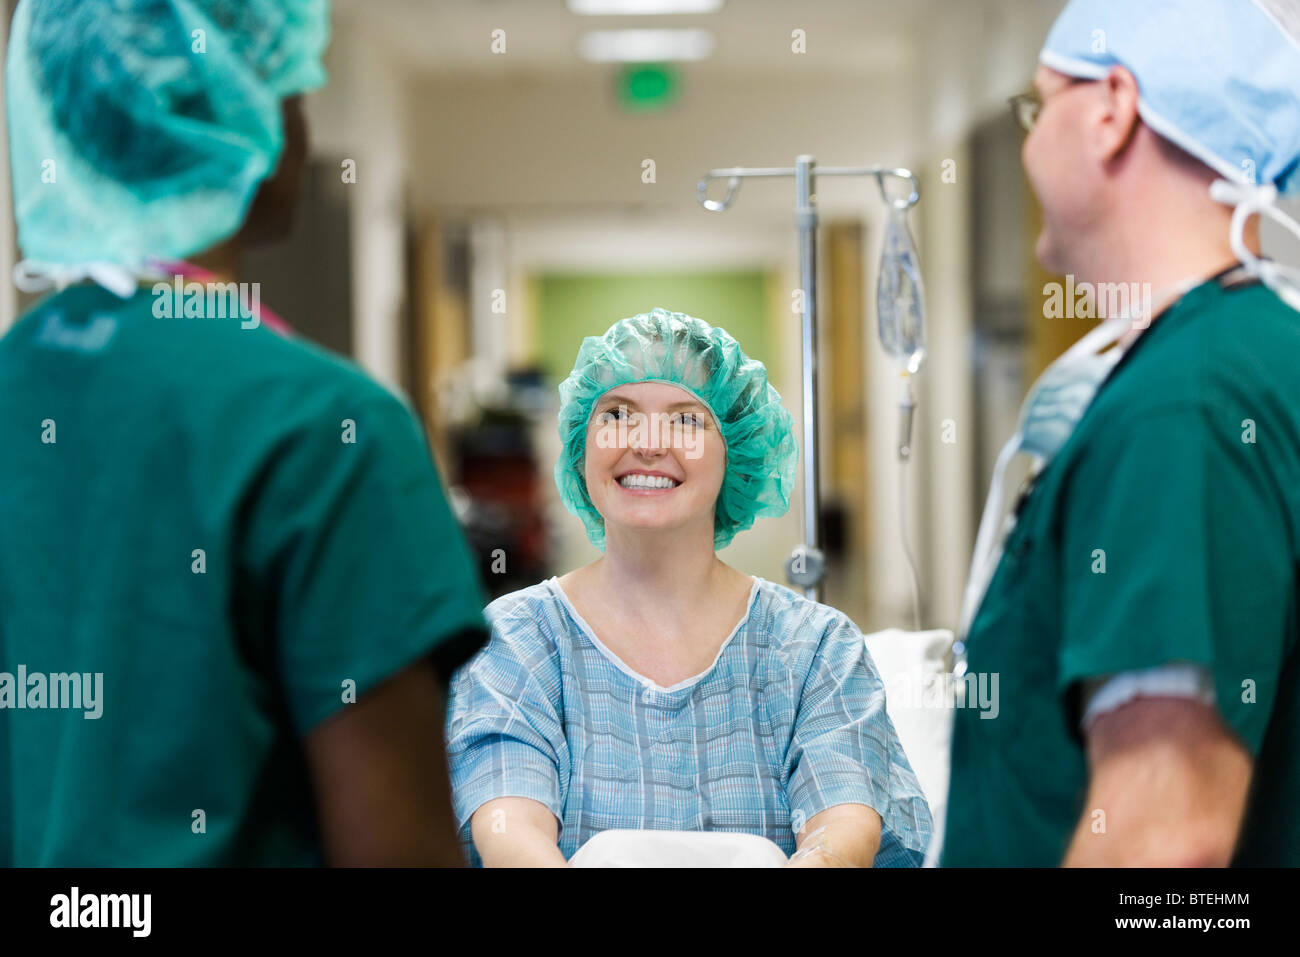 Patient chatting with healthcare workers Stock Photo